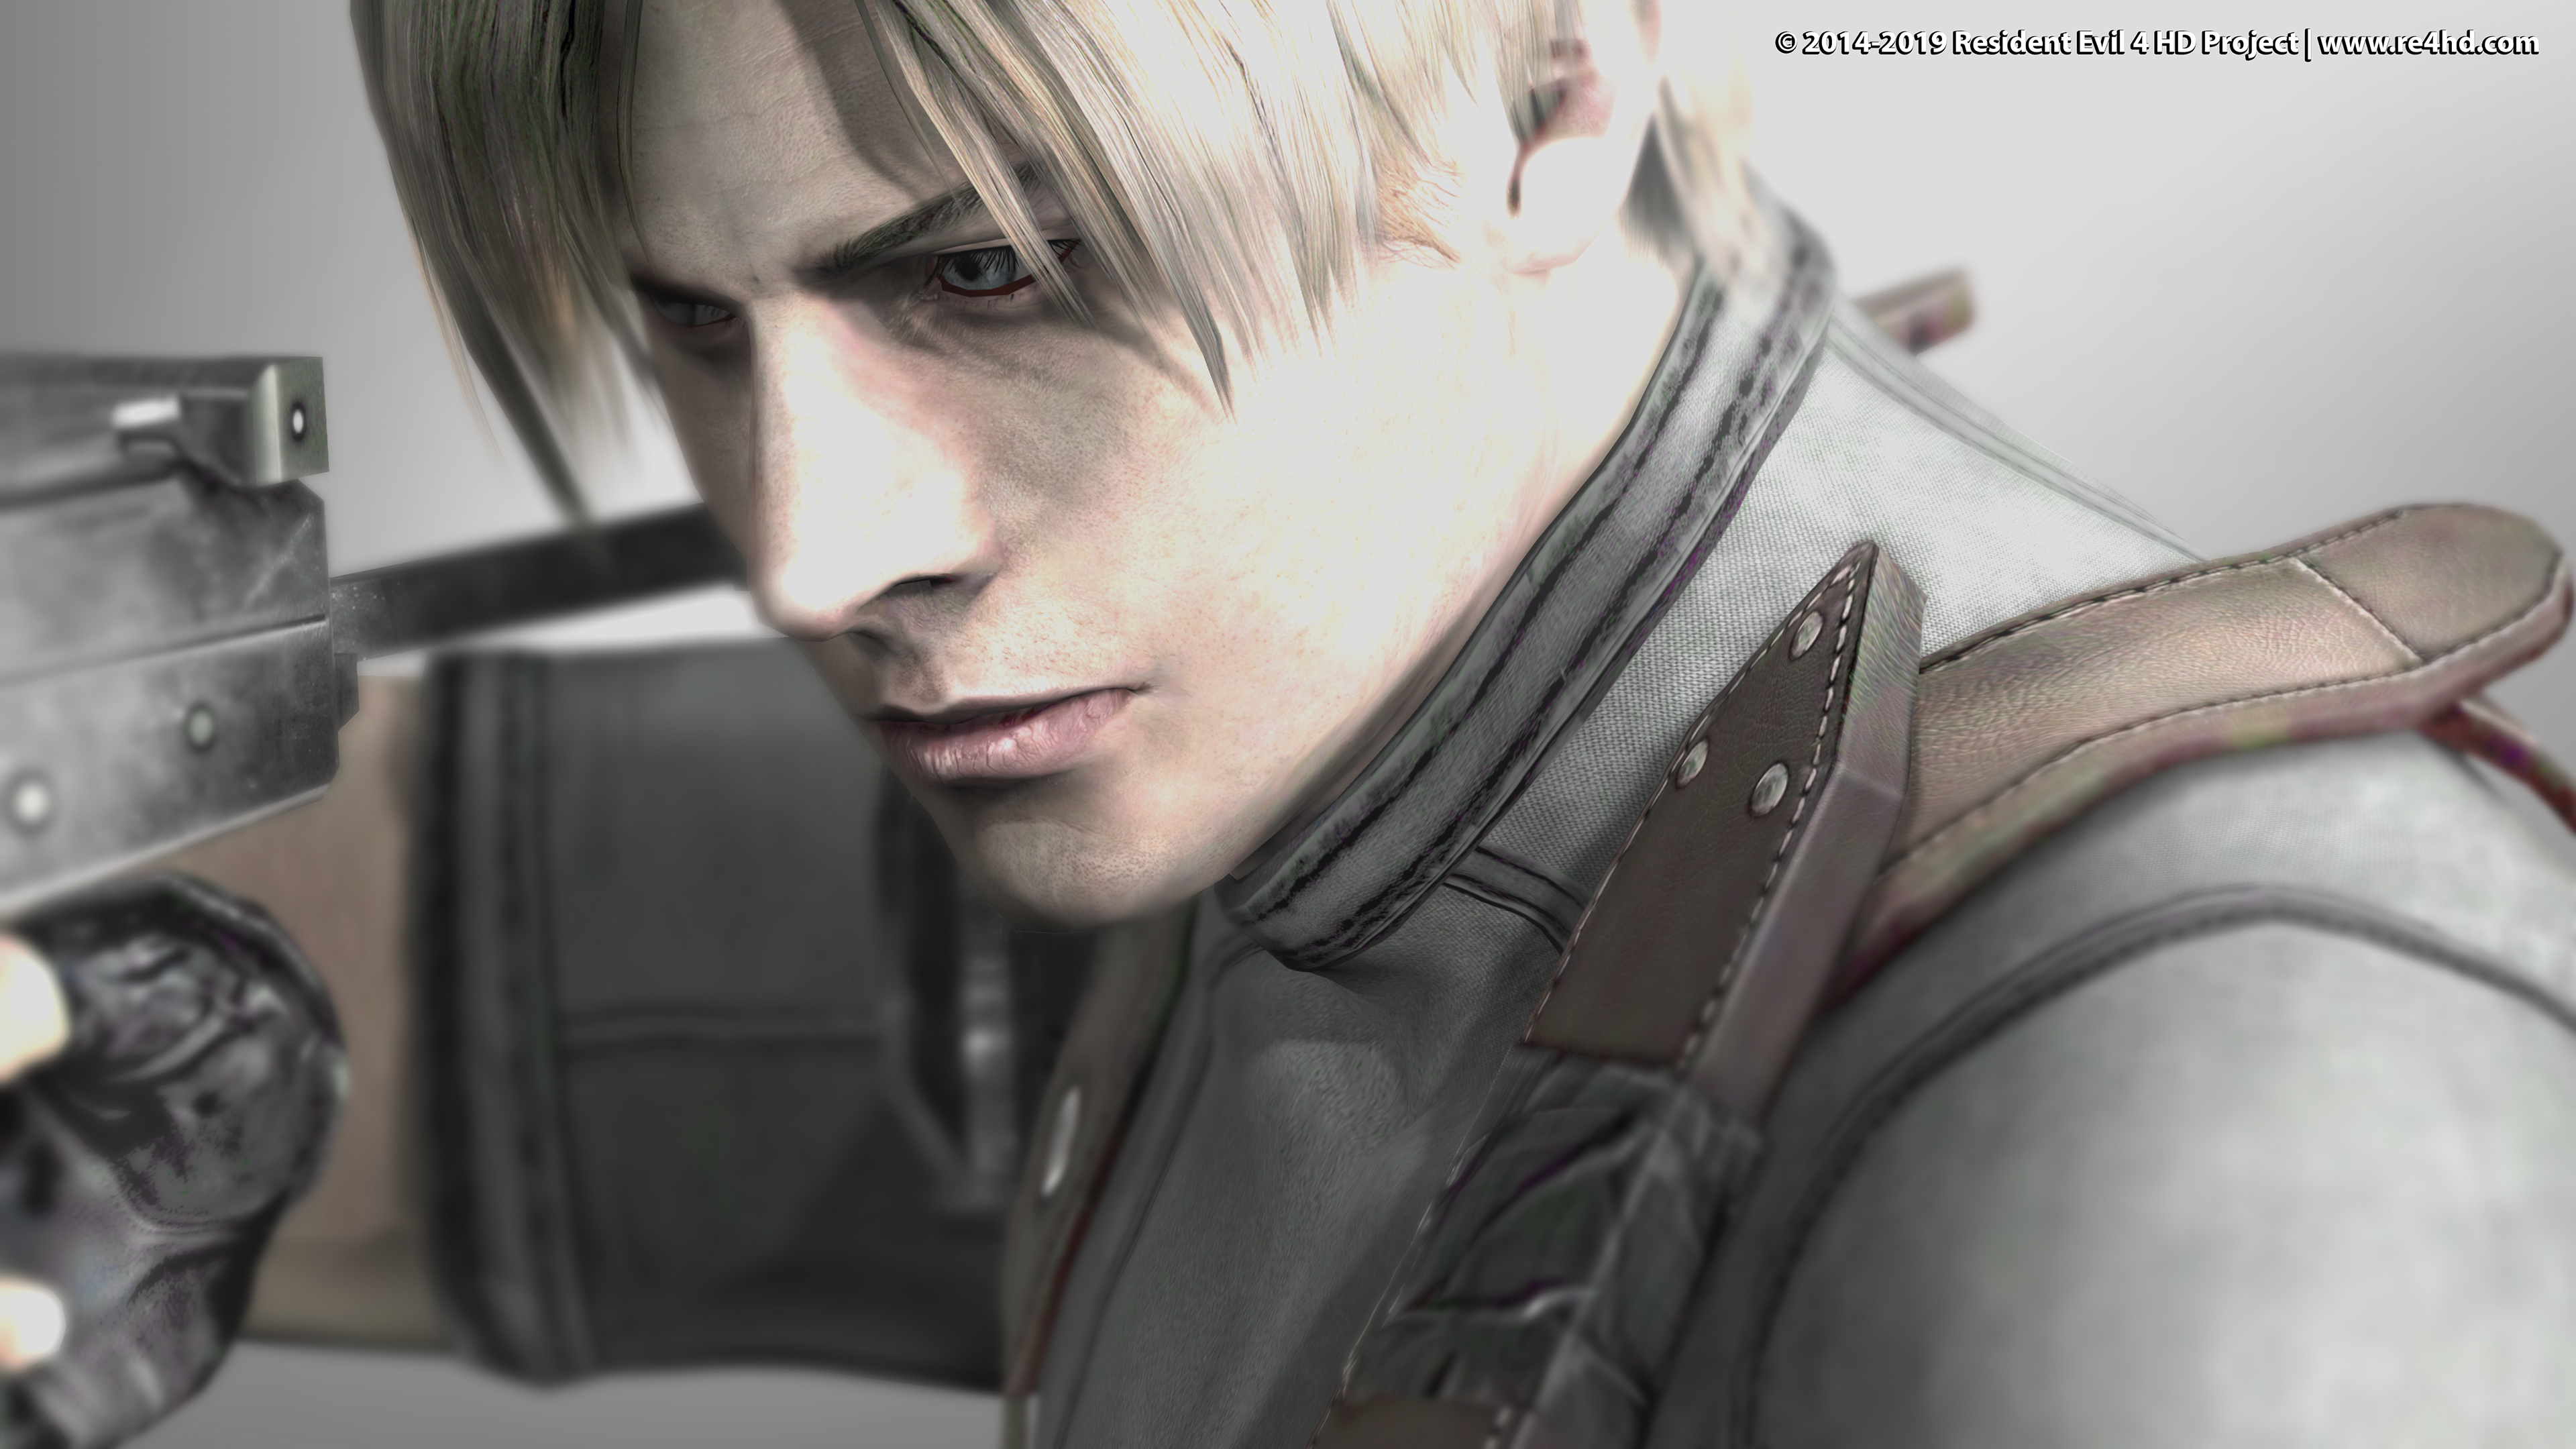 Resident evil 4 hd project steam фото 89